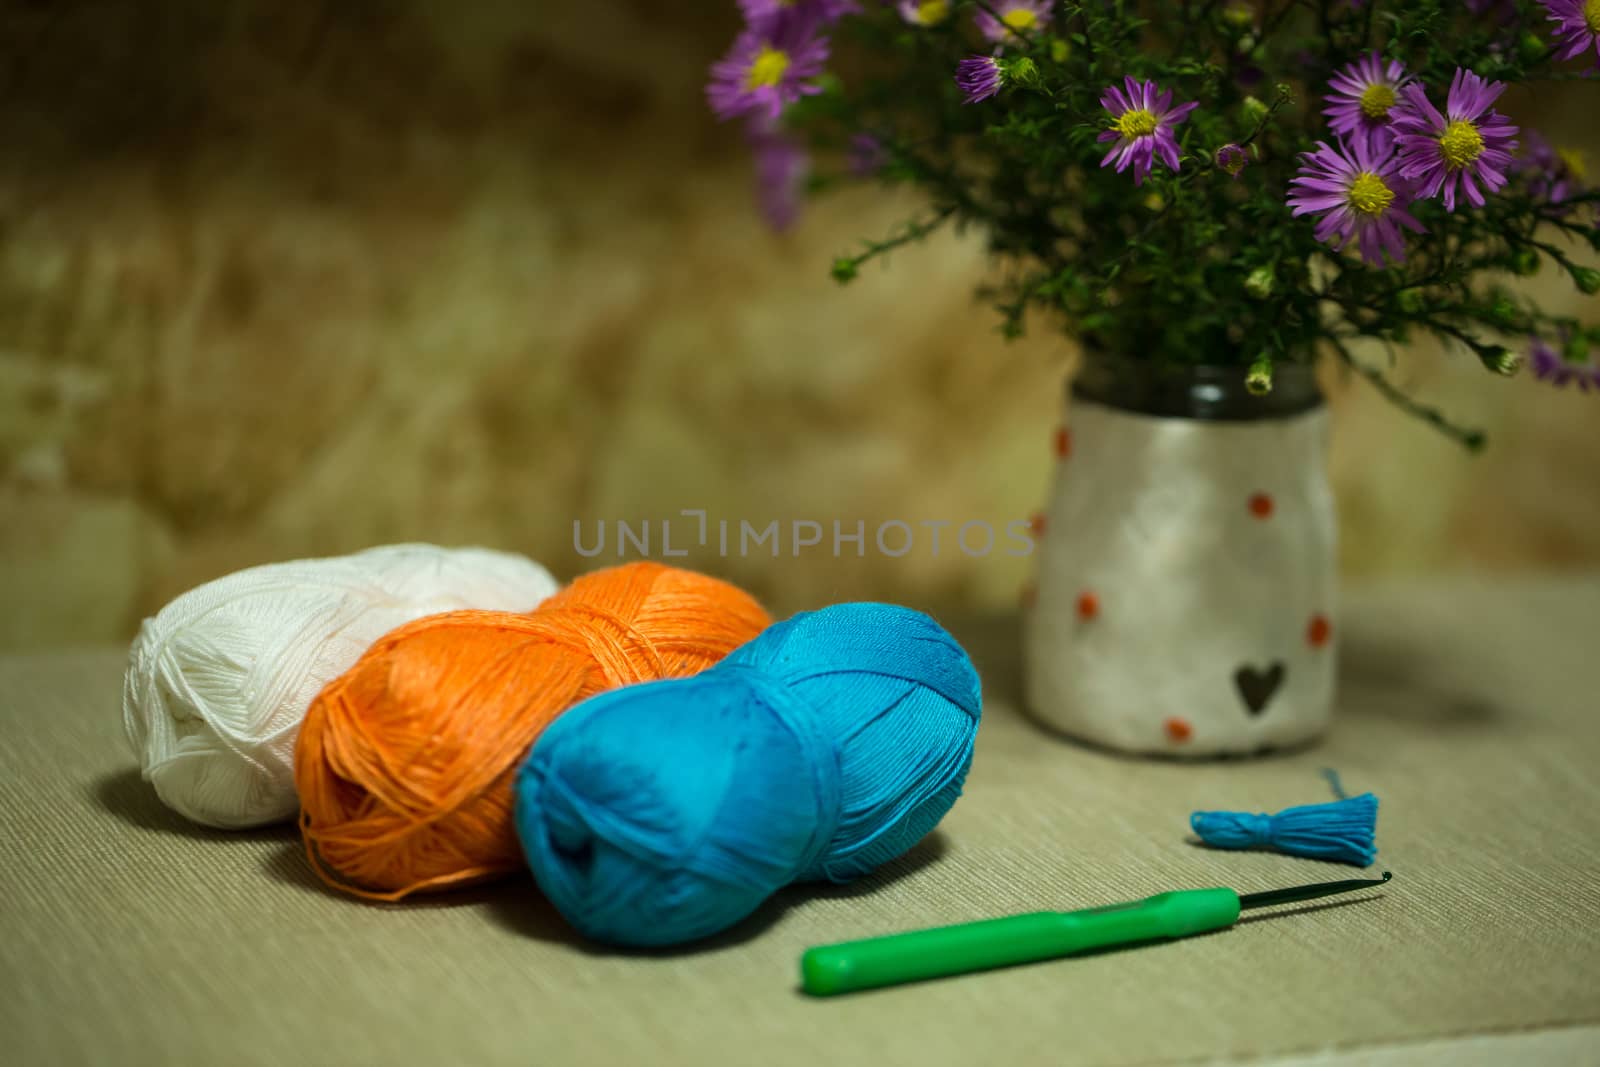 balls of yarn, green crochet hook, and a bouquet of flowers